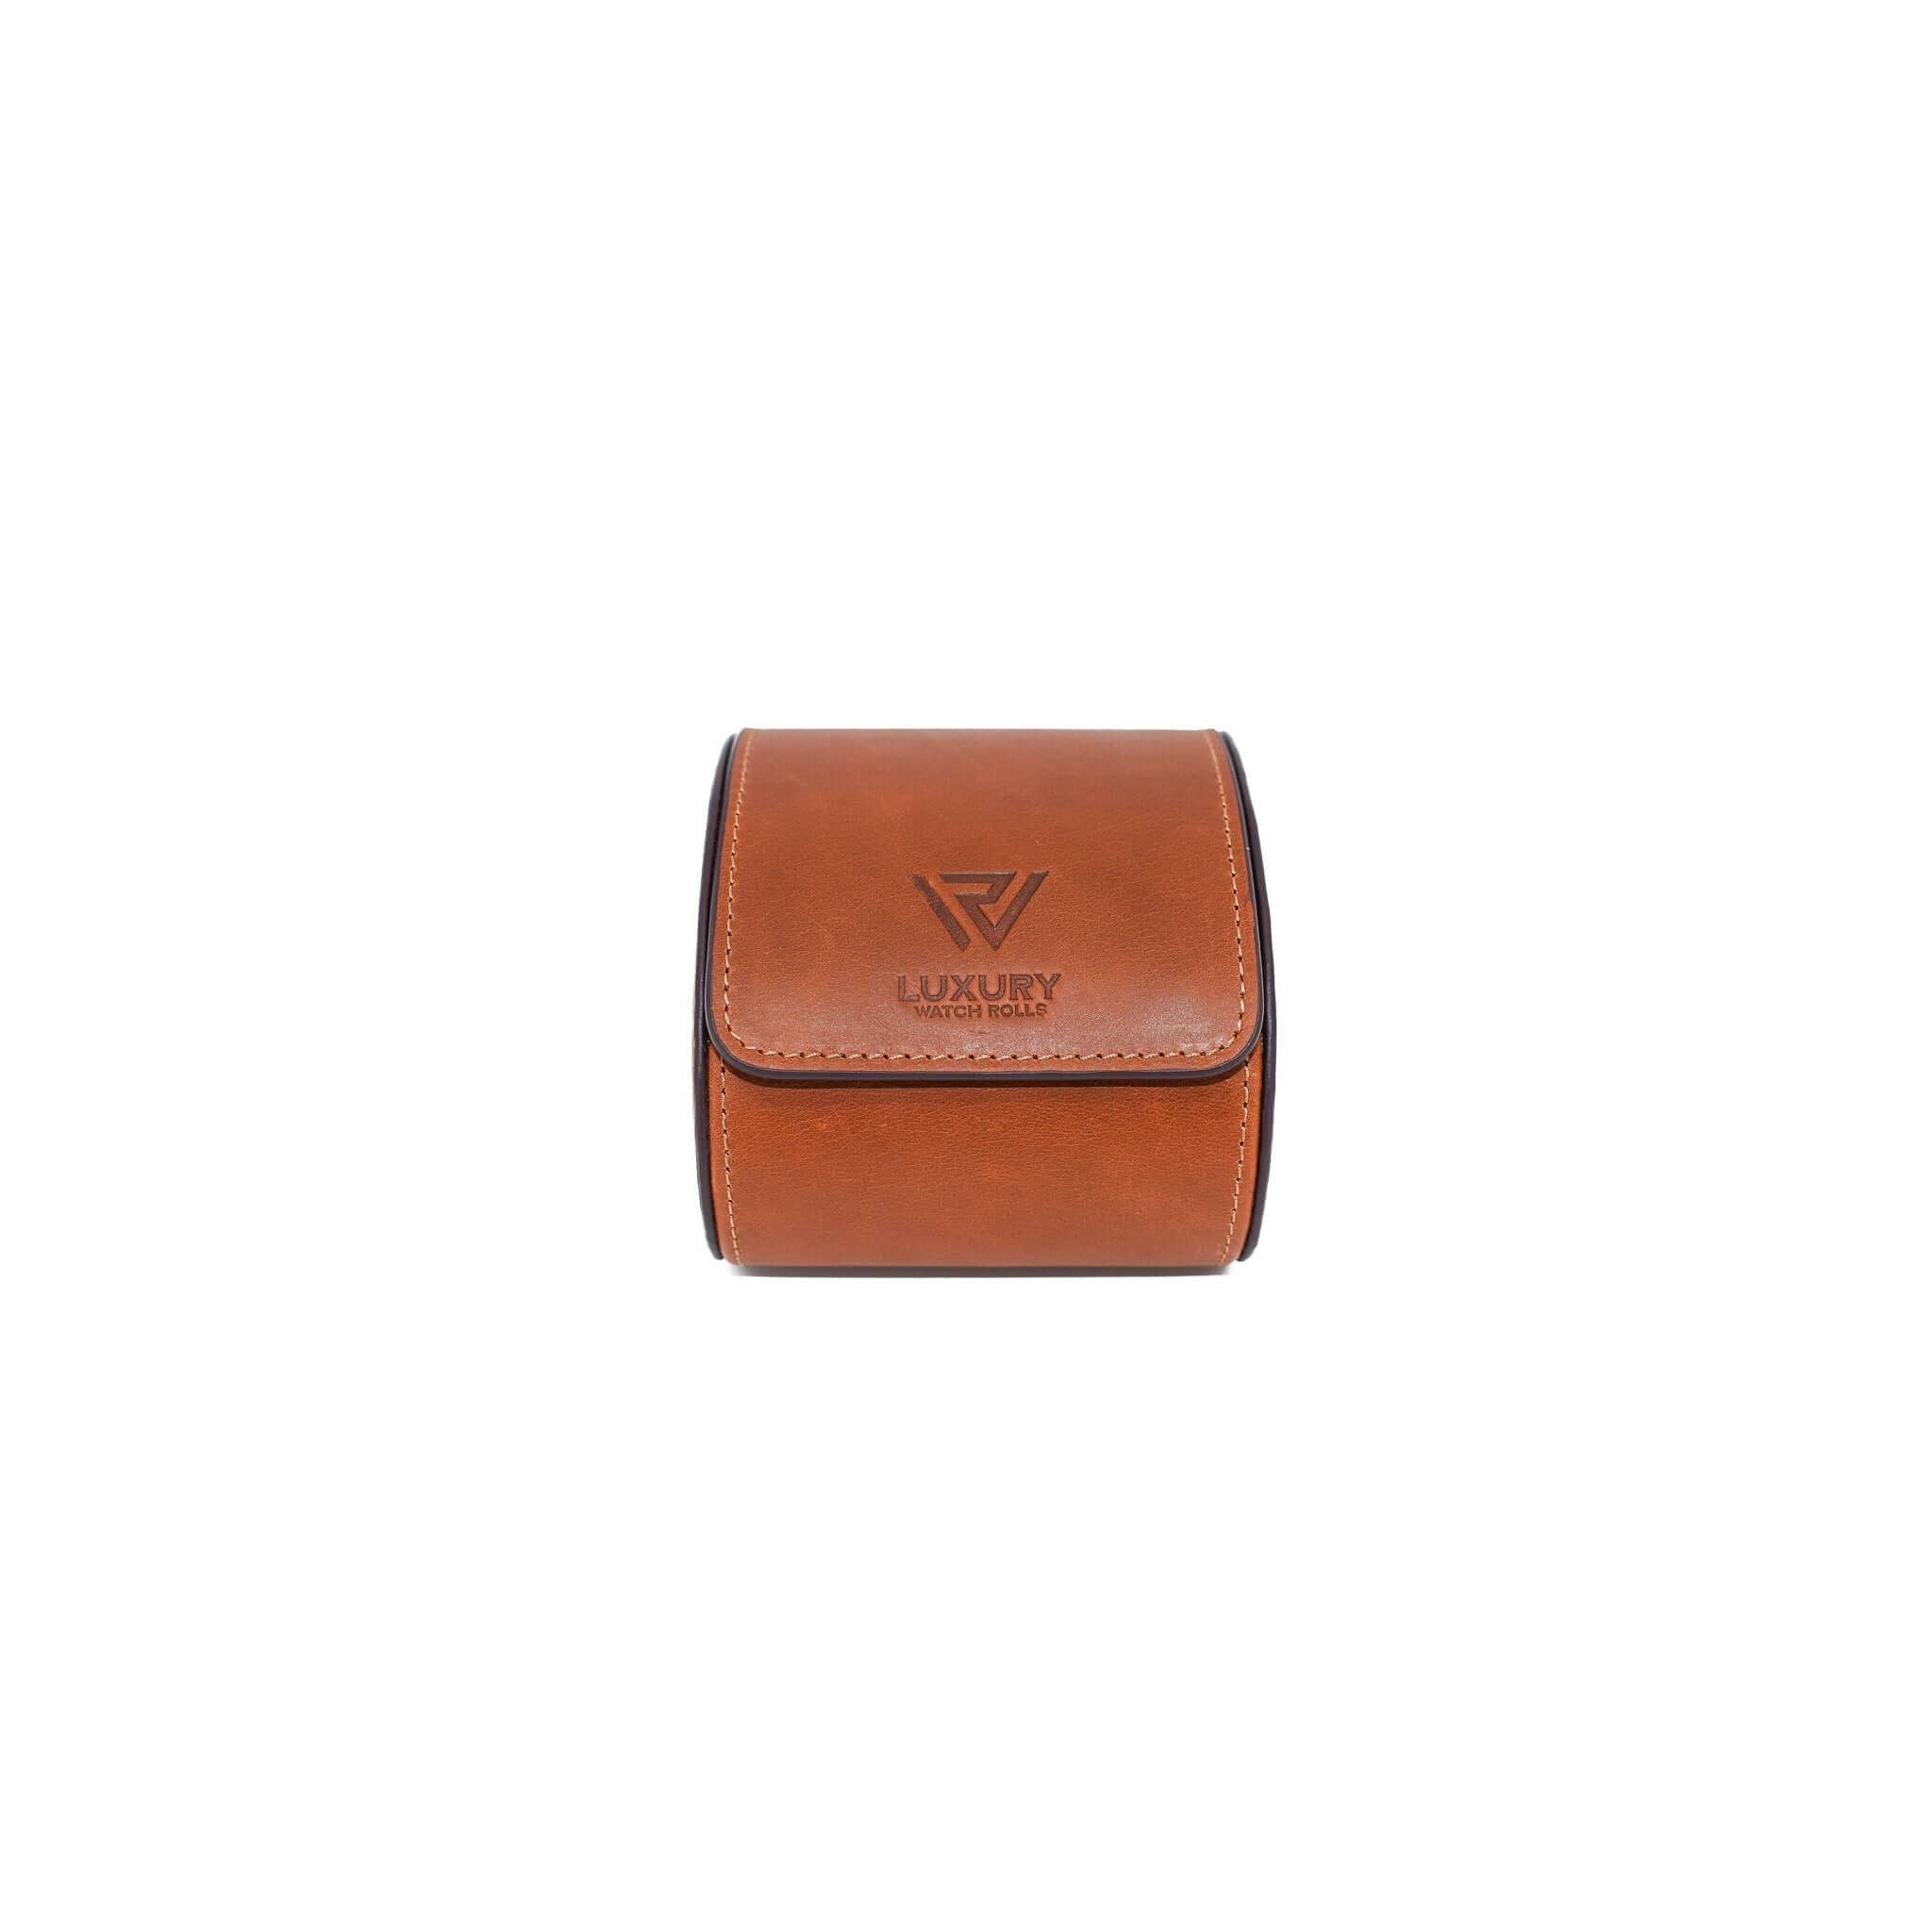 A front view of Luxury Watch Roll's single slot, vintage brown leather watch roll for one watch storage.